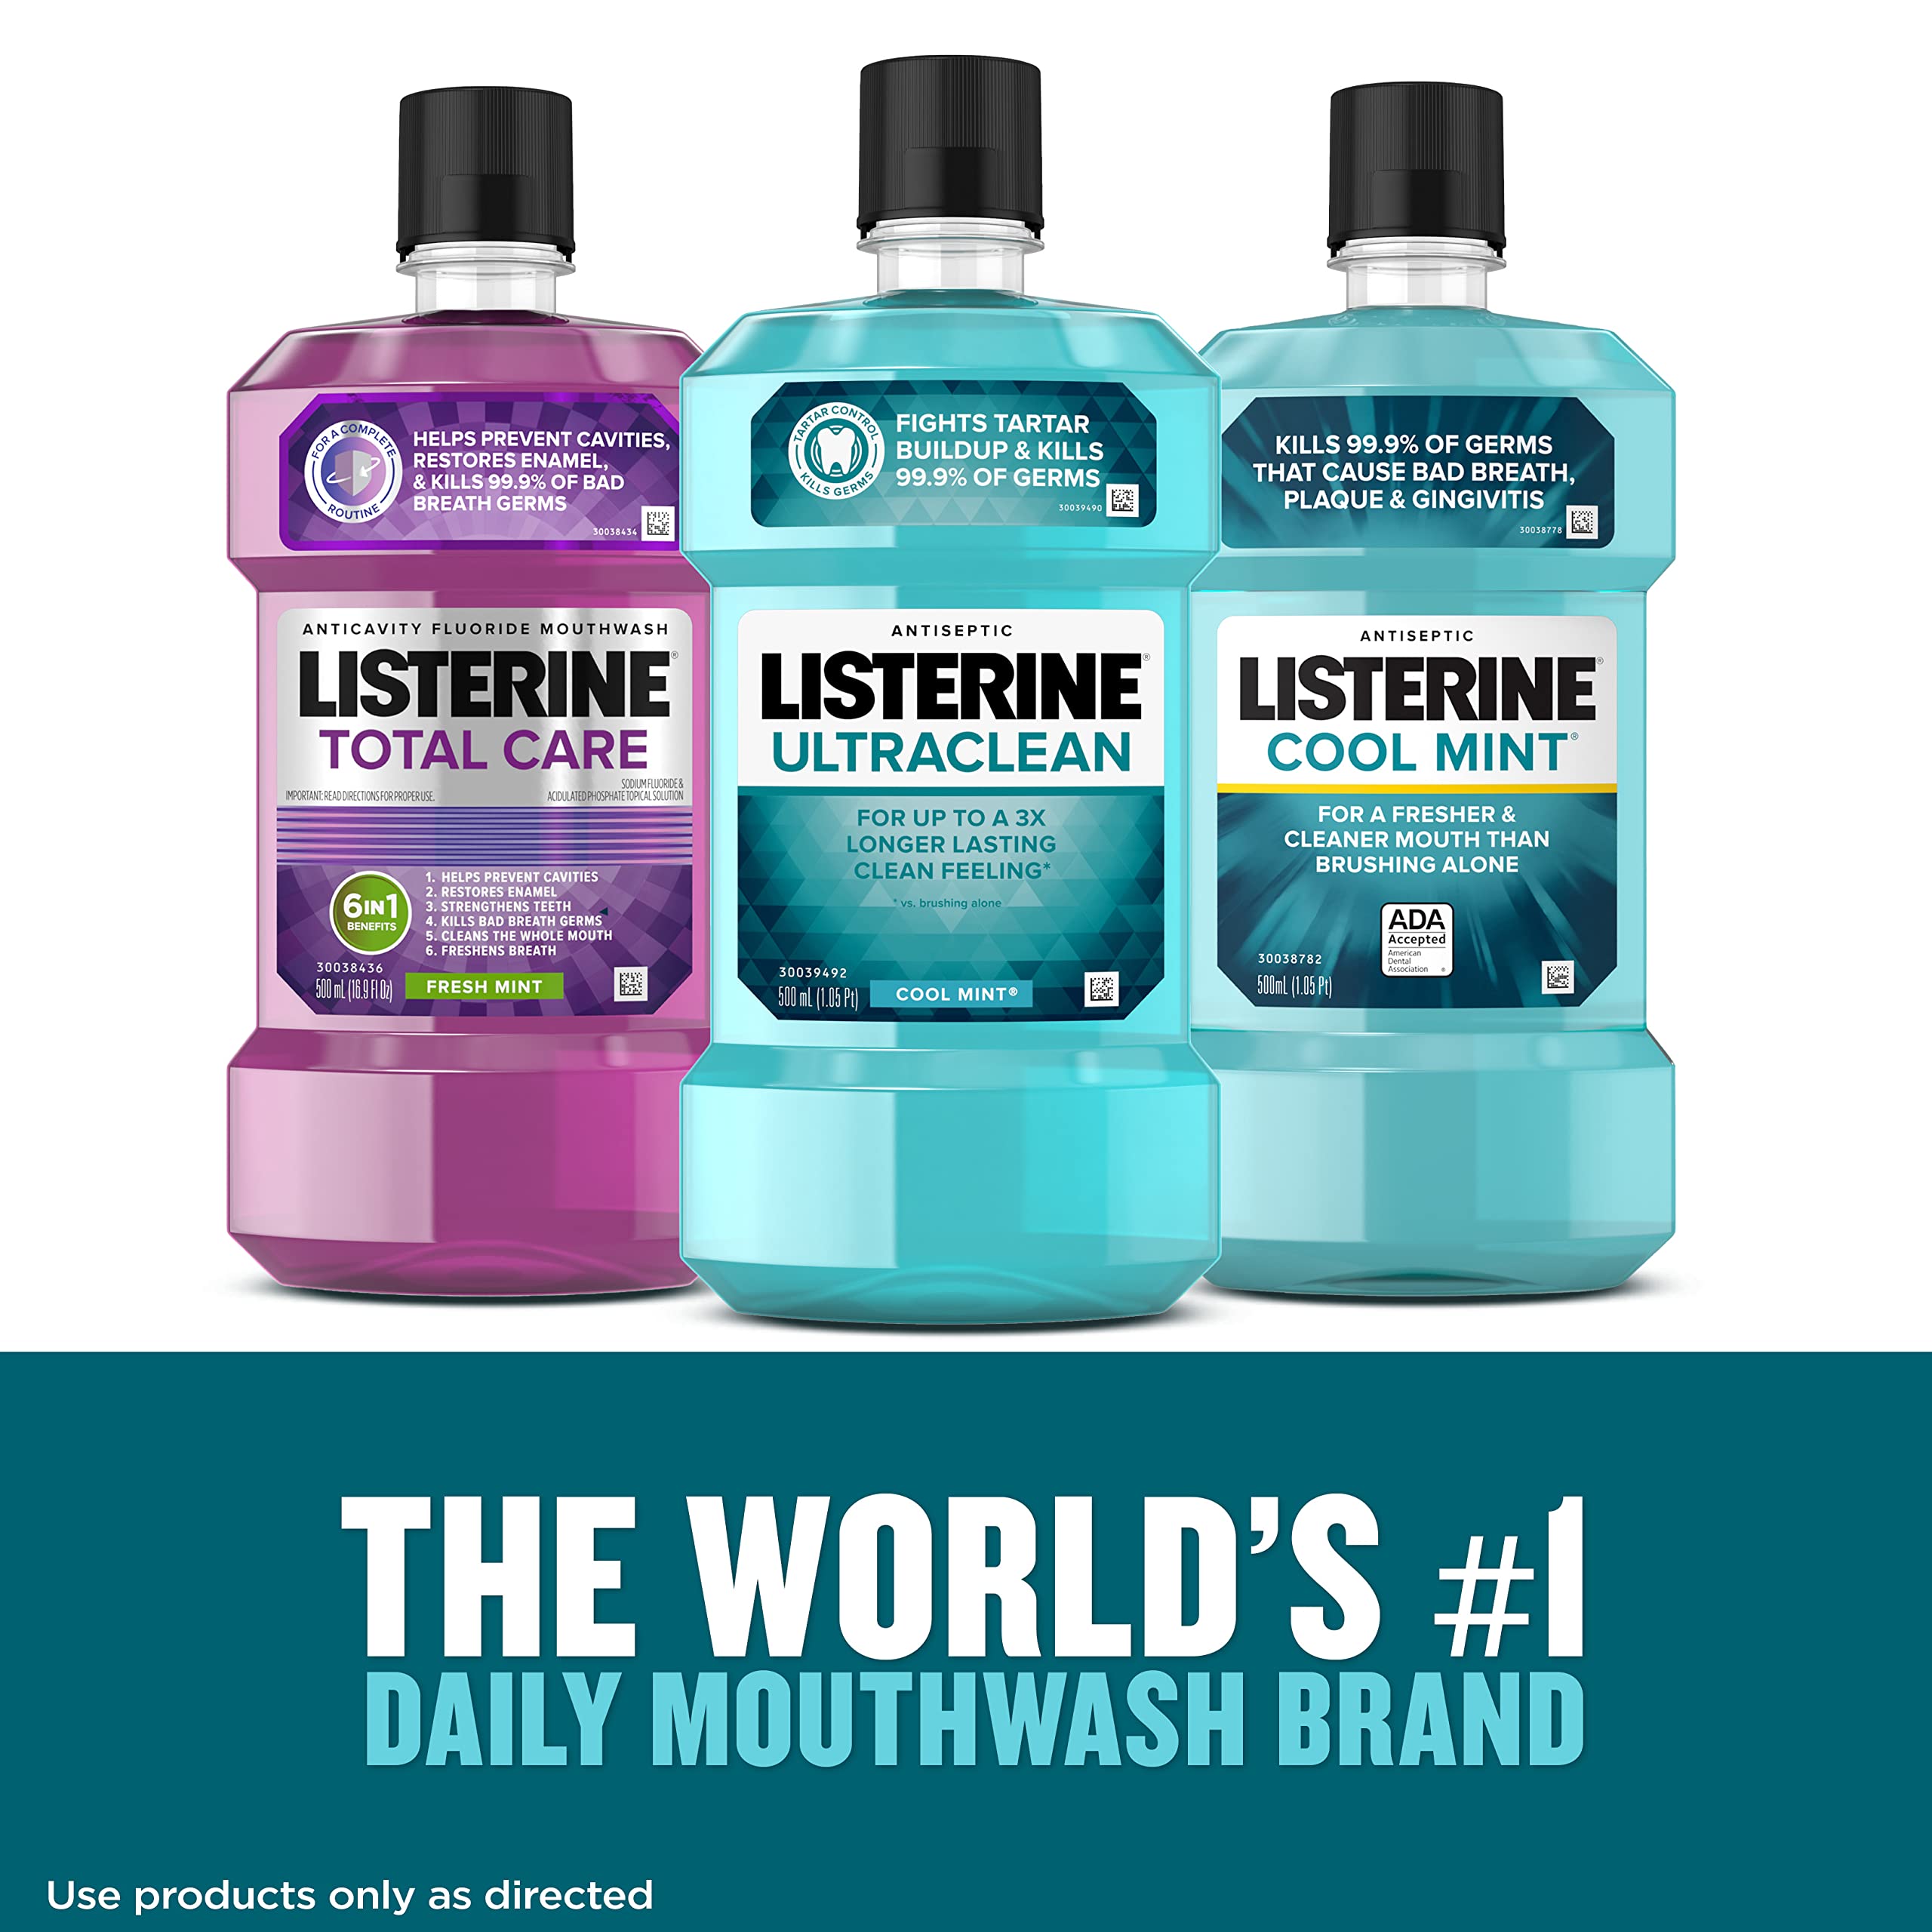 Listerine Ultraclean Oral Care Antiseptic Mouthwash to Help Fight Bad Breath Germs, Gingivitis, Plaque and Tartar, Oral Rinse for Healthy Gums & Fresh Breath, Cool Mint Flavor, 500 mL